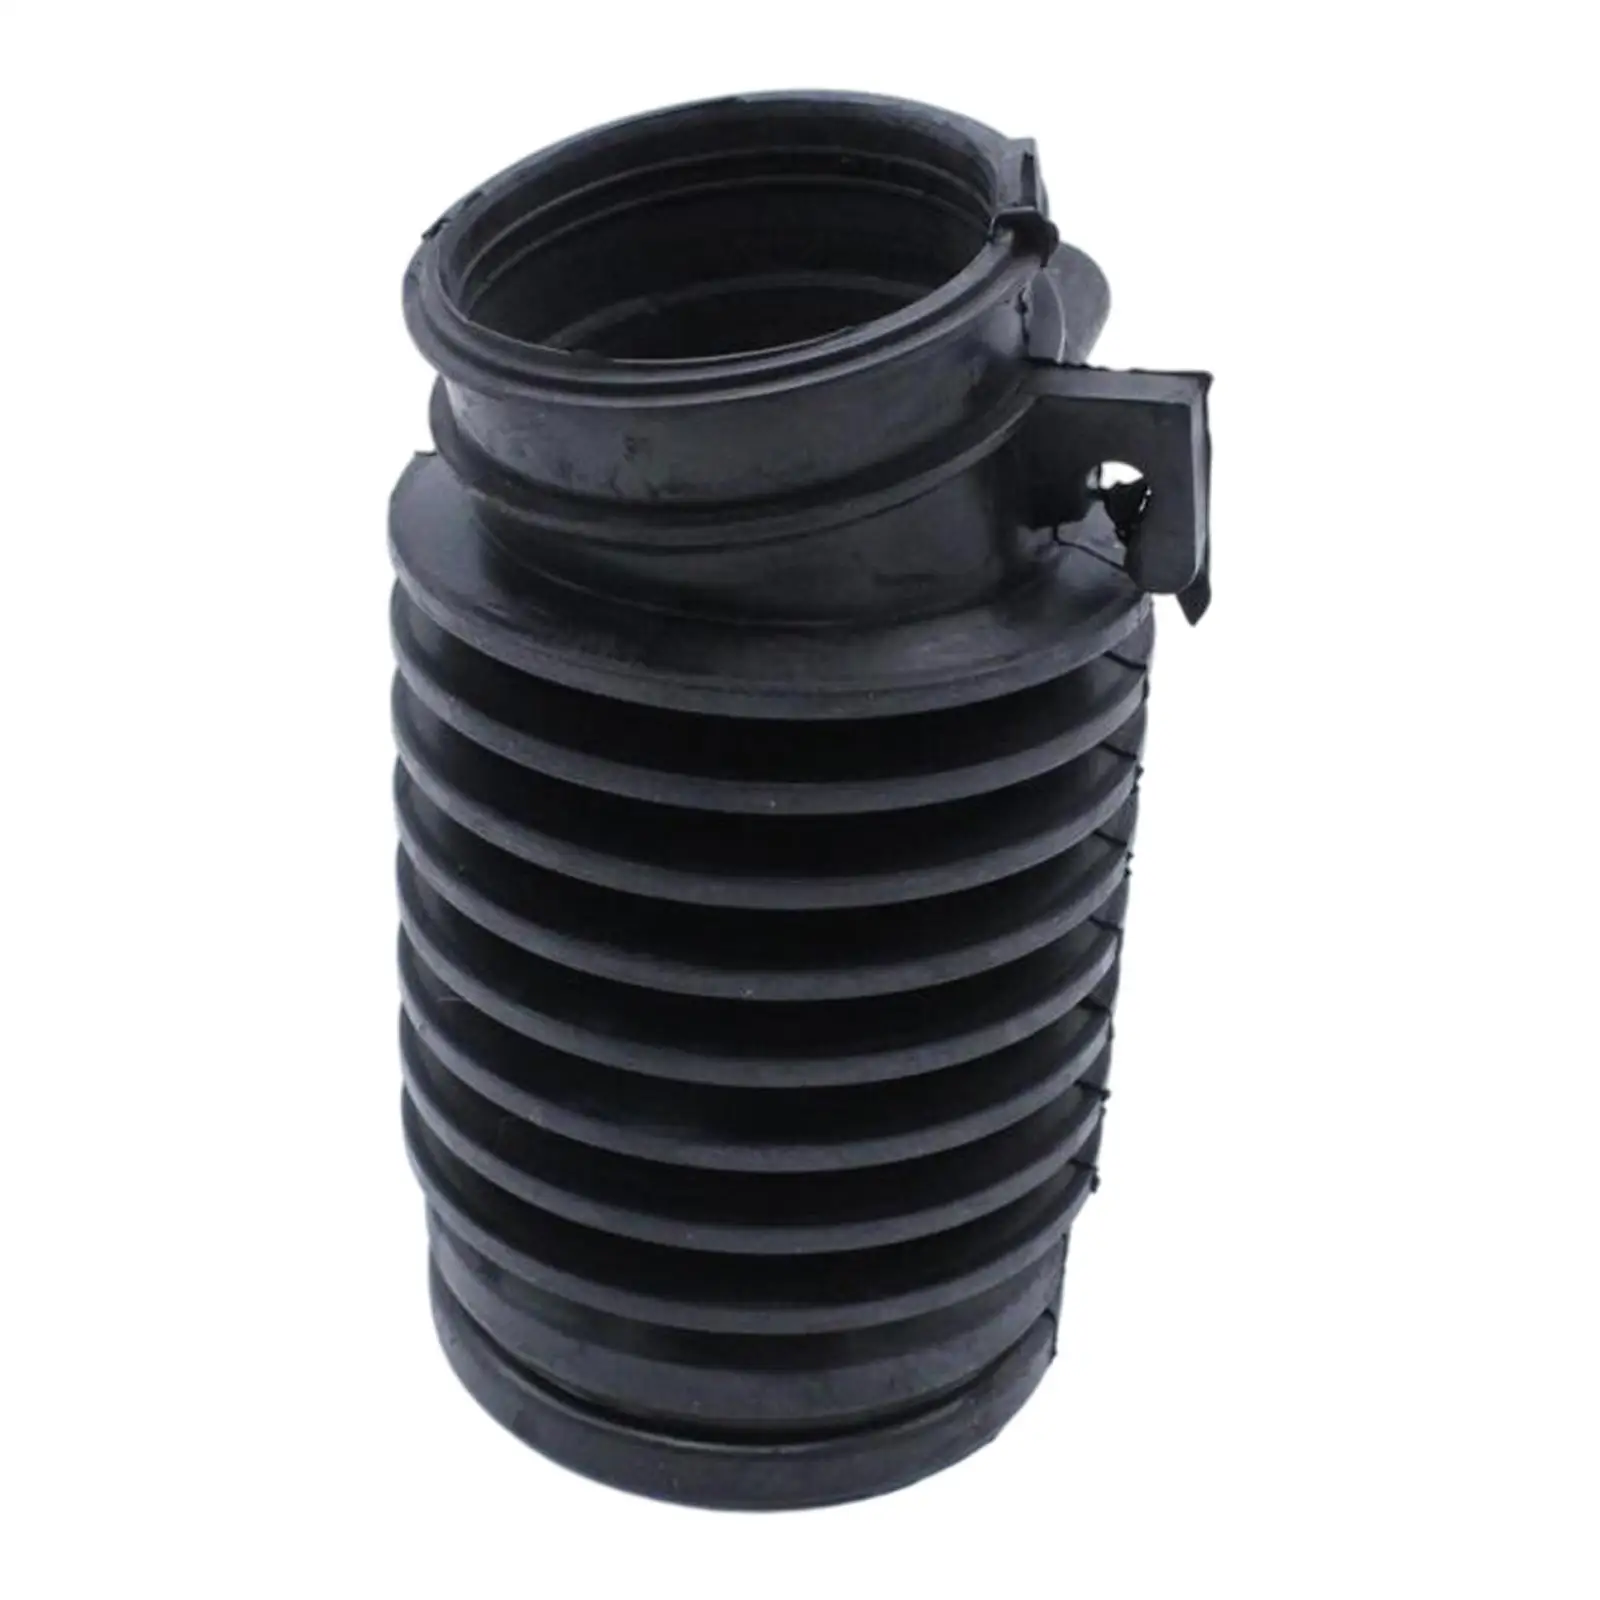 Air Intake Hose 17228Rcaa00 Replace Fit for V6 3.0L 2003-2007